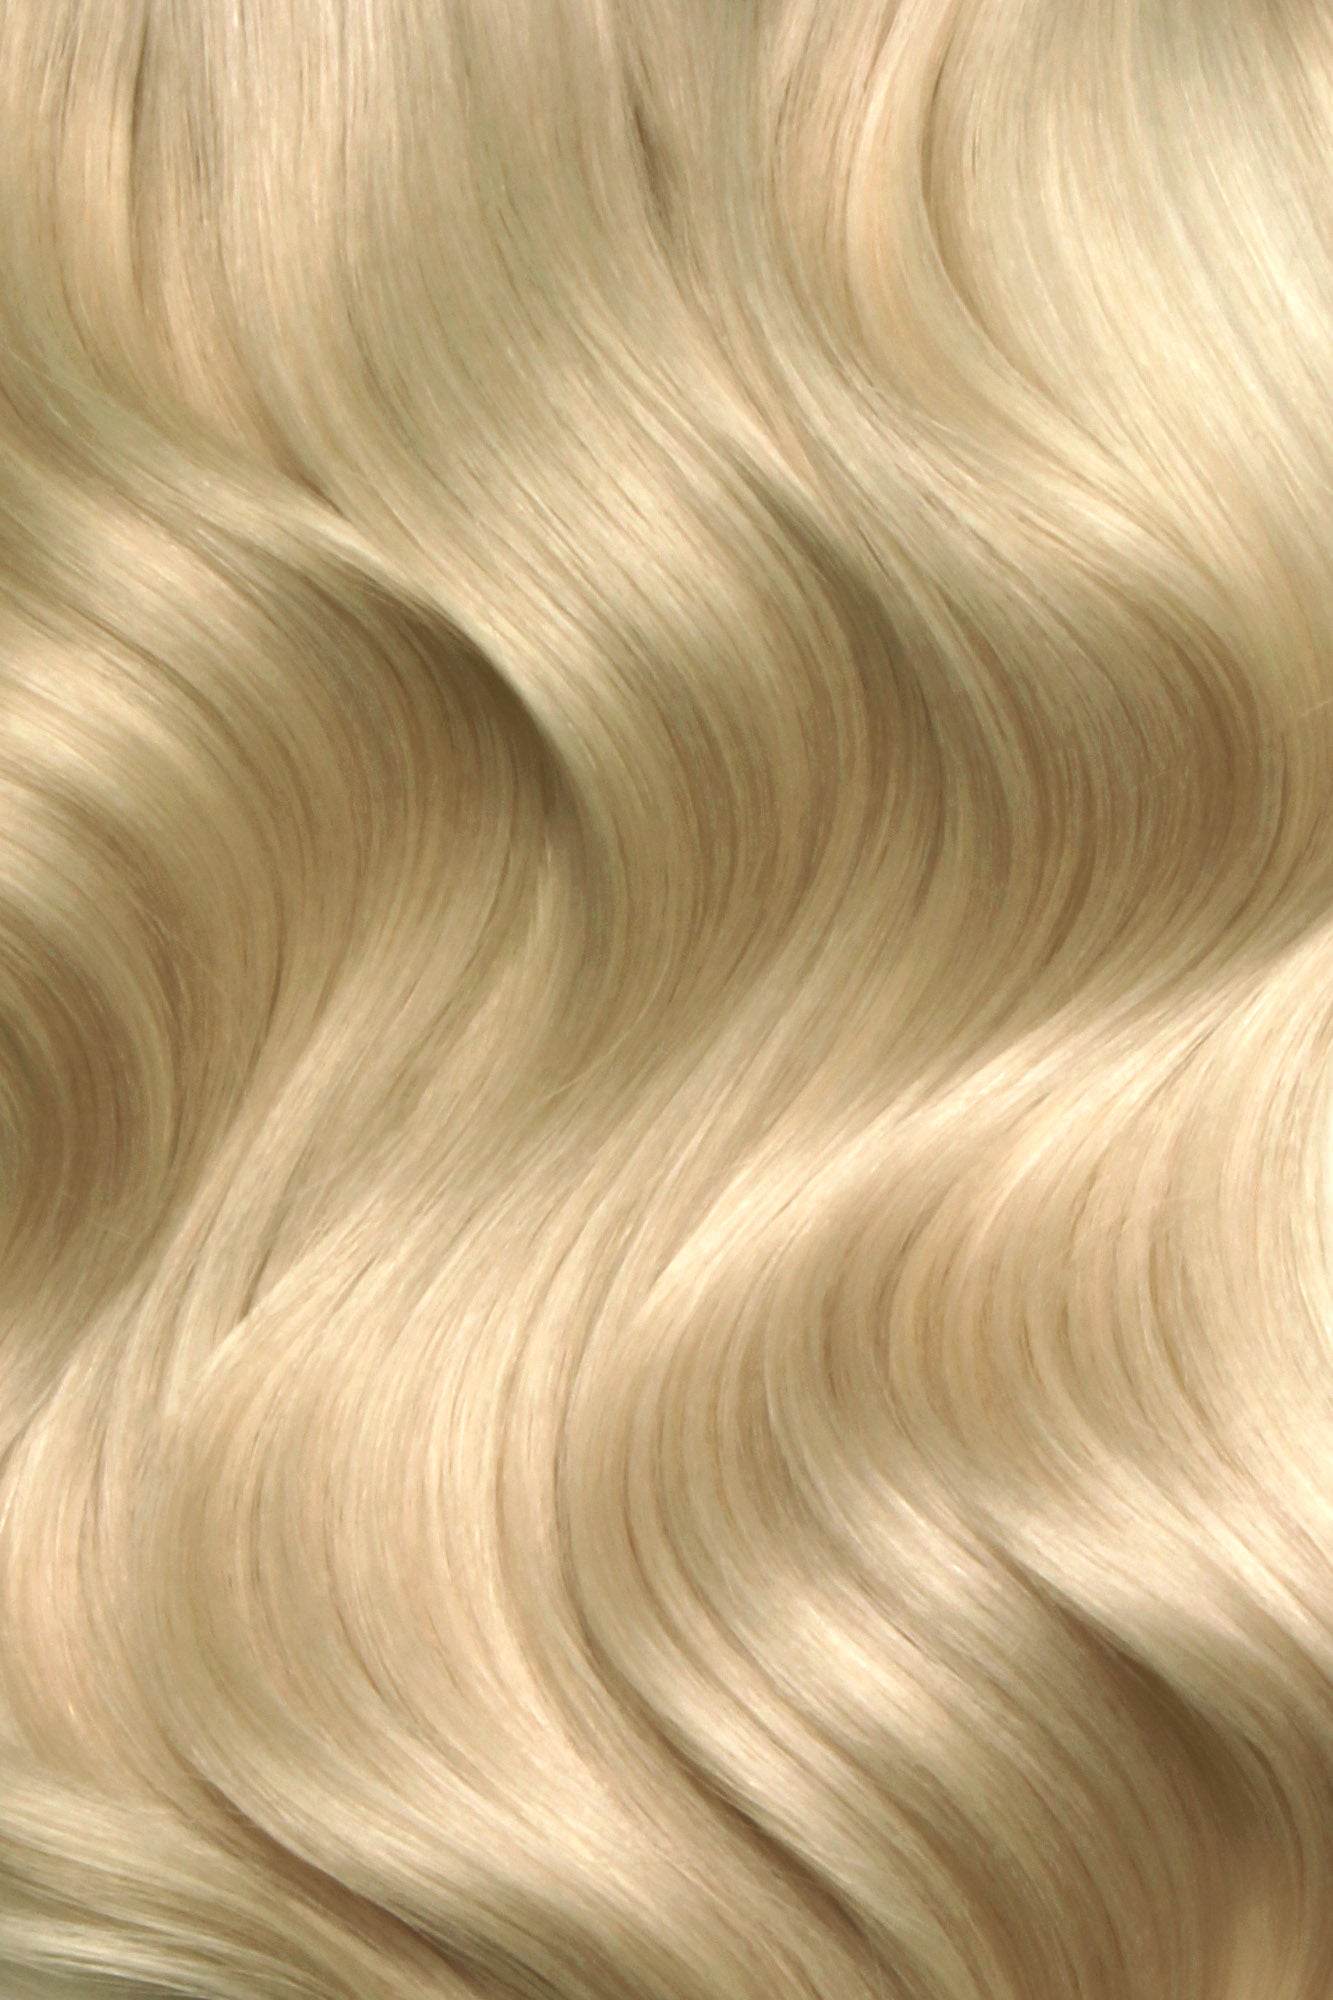 Tiny Tip Bonds 22&quot; - SWAY Hair Extensions LA-Blonde: Lightweight, discreet. Made with Italian Keratin for comfort and long-lasting wear. Reusable and compatible with other SWAY Salon Professional Methods